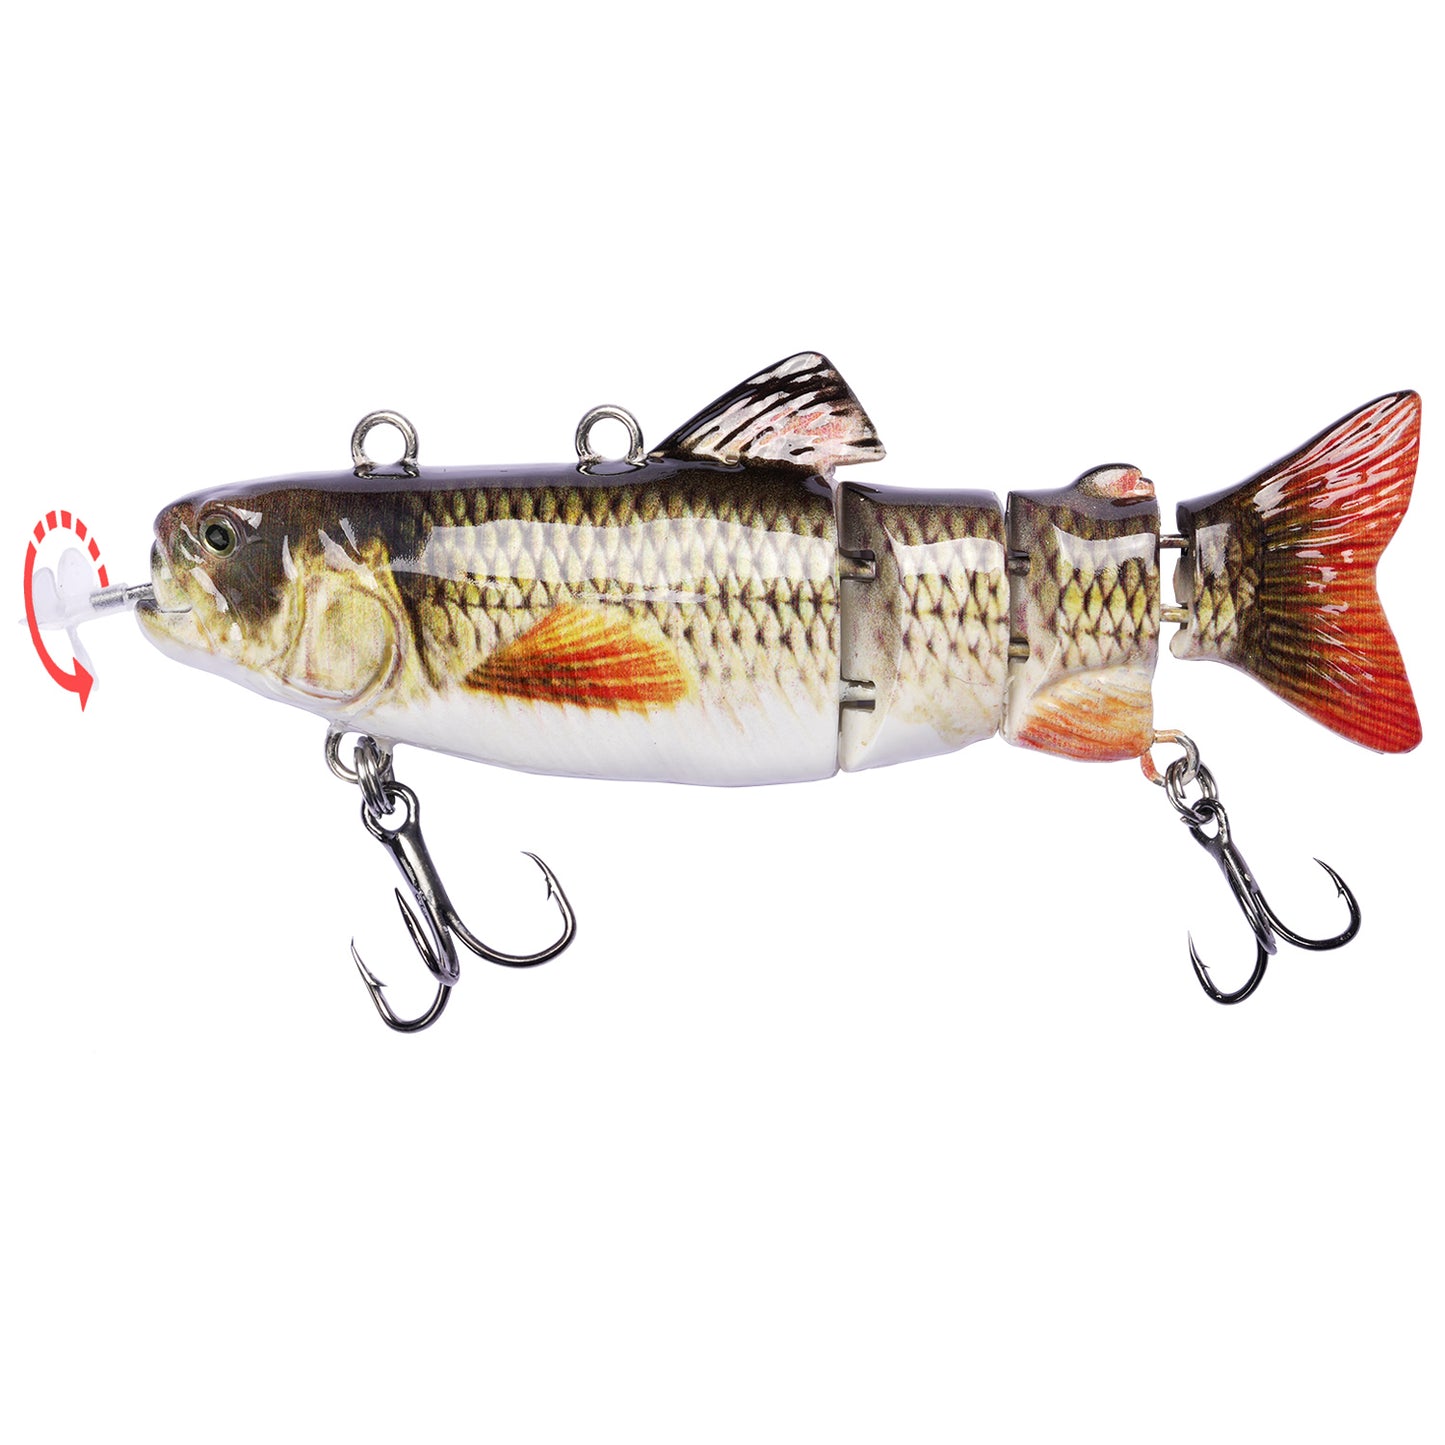 DaMiRa fishing lures for bass Robotic Swimming Lure Multi-Section